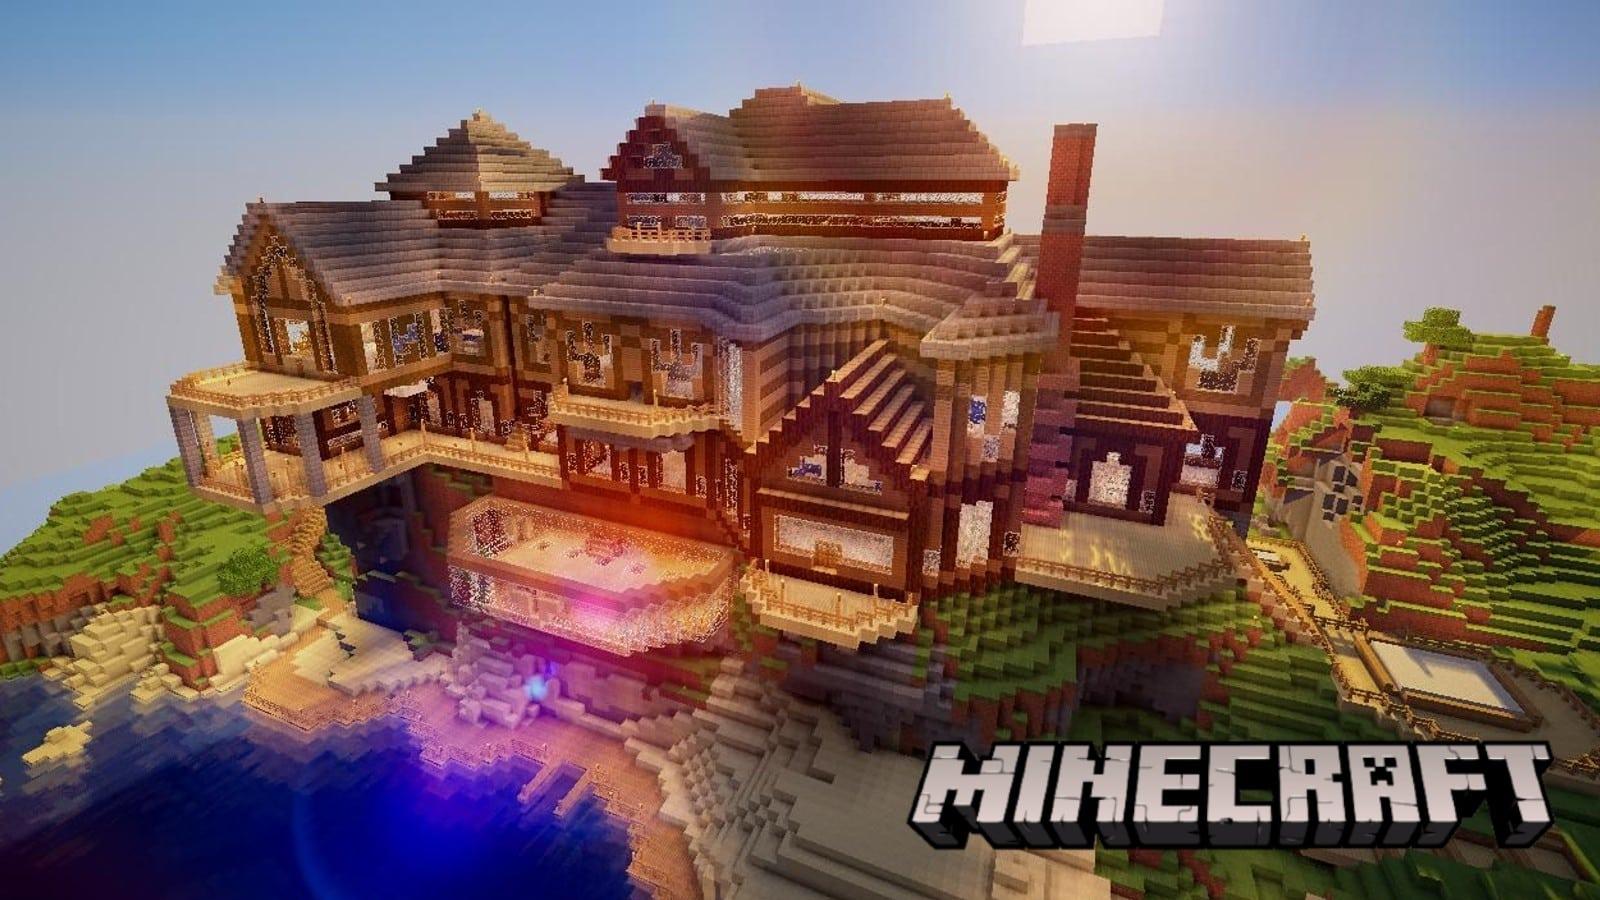 Minecraft: How to Build a Large Medieval House  Minecraft house tutorials,  Minecraft cottage, Minecraft houses